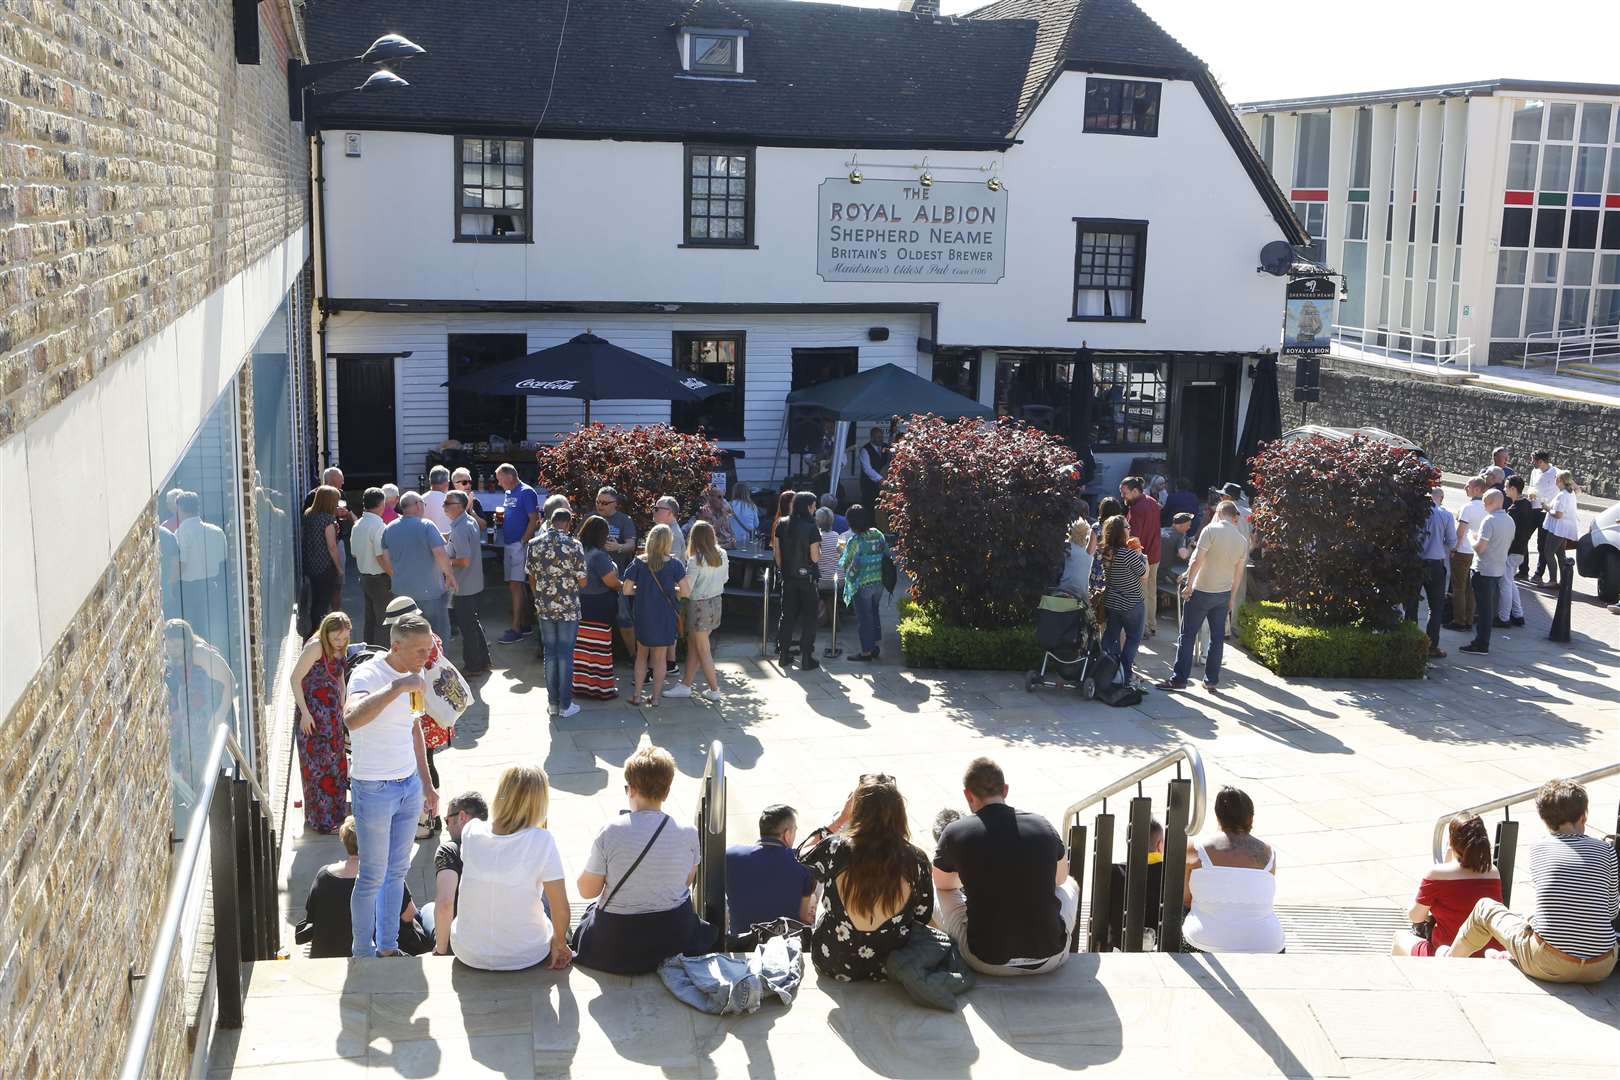 Crowds at The Royal Albion for the Maidstone Fringe Festival in 2018